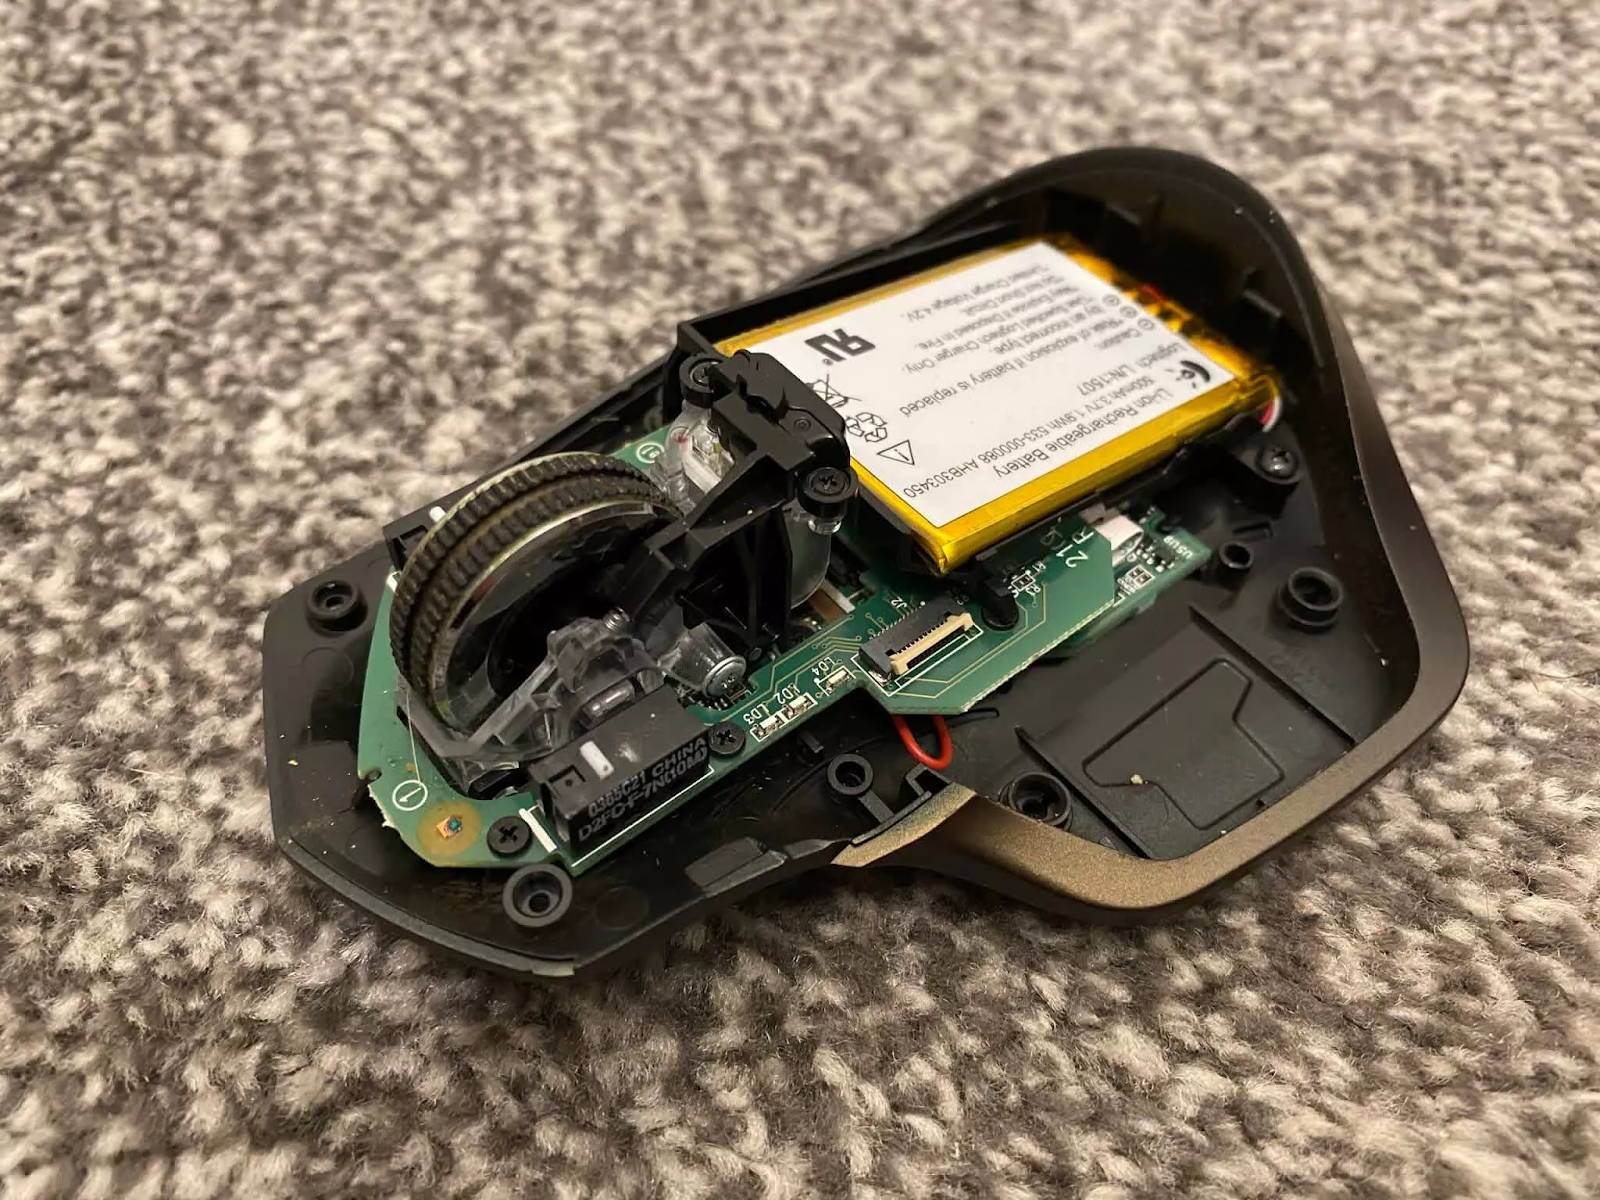 The inner workings of a gaming mouse don’t allow for a vibration function as a controller does.